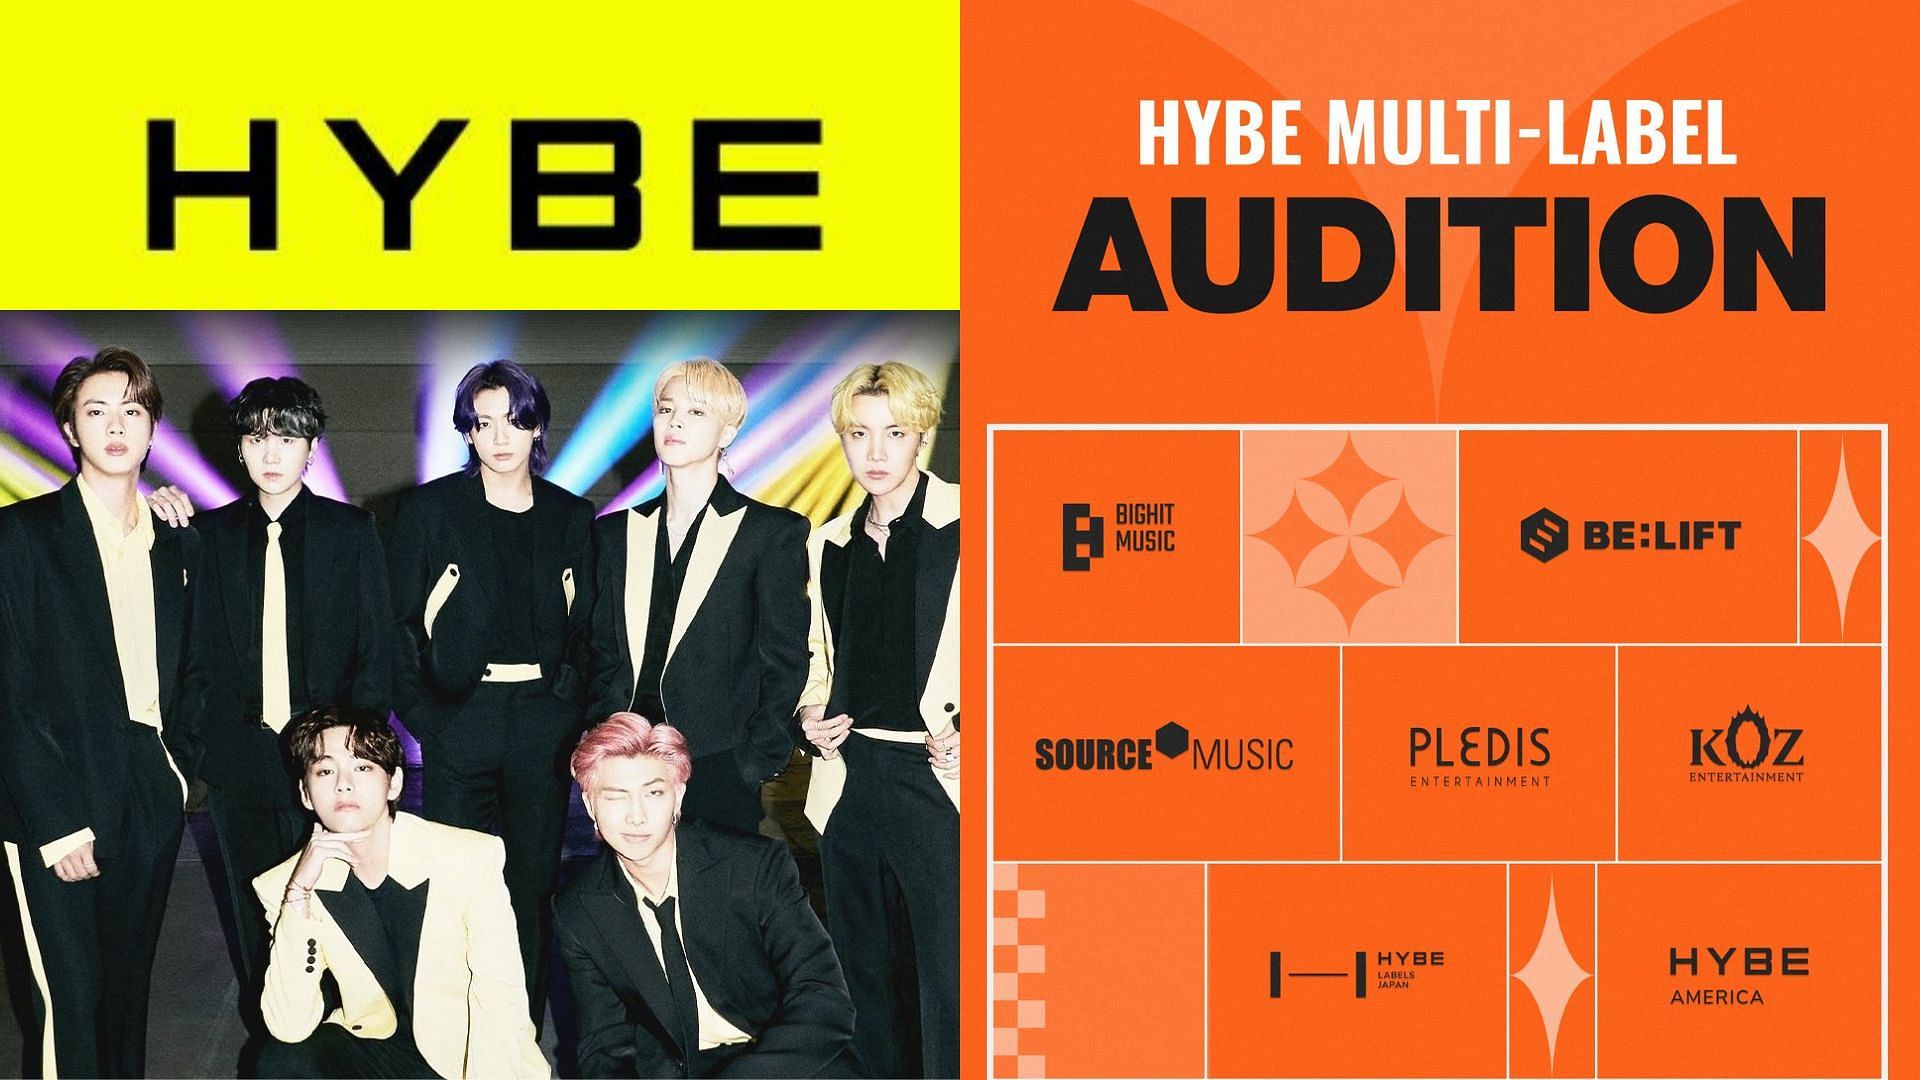 HYBE will be holding a multilabel global audition in the US